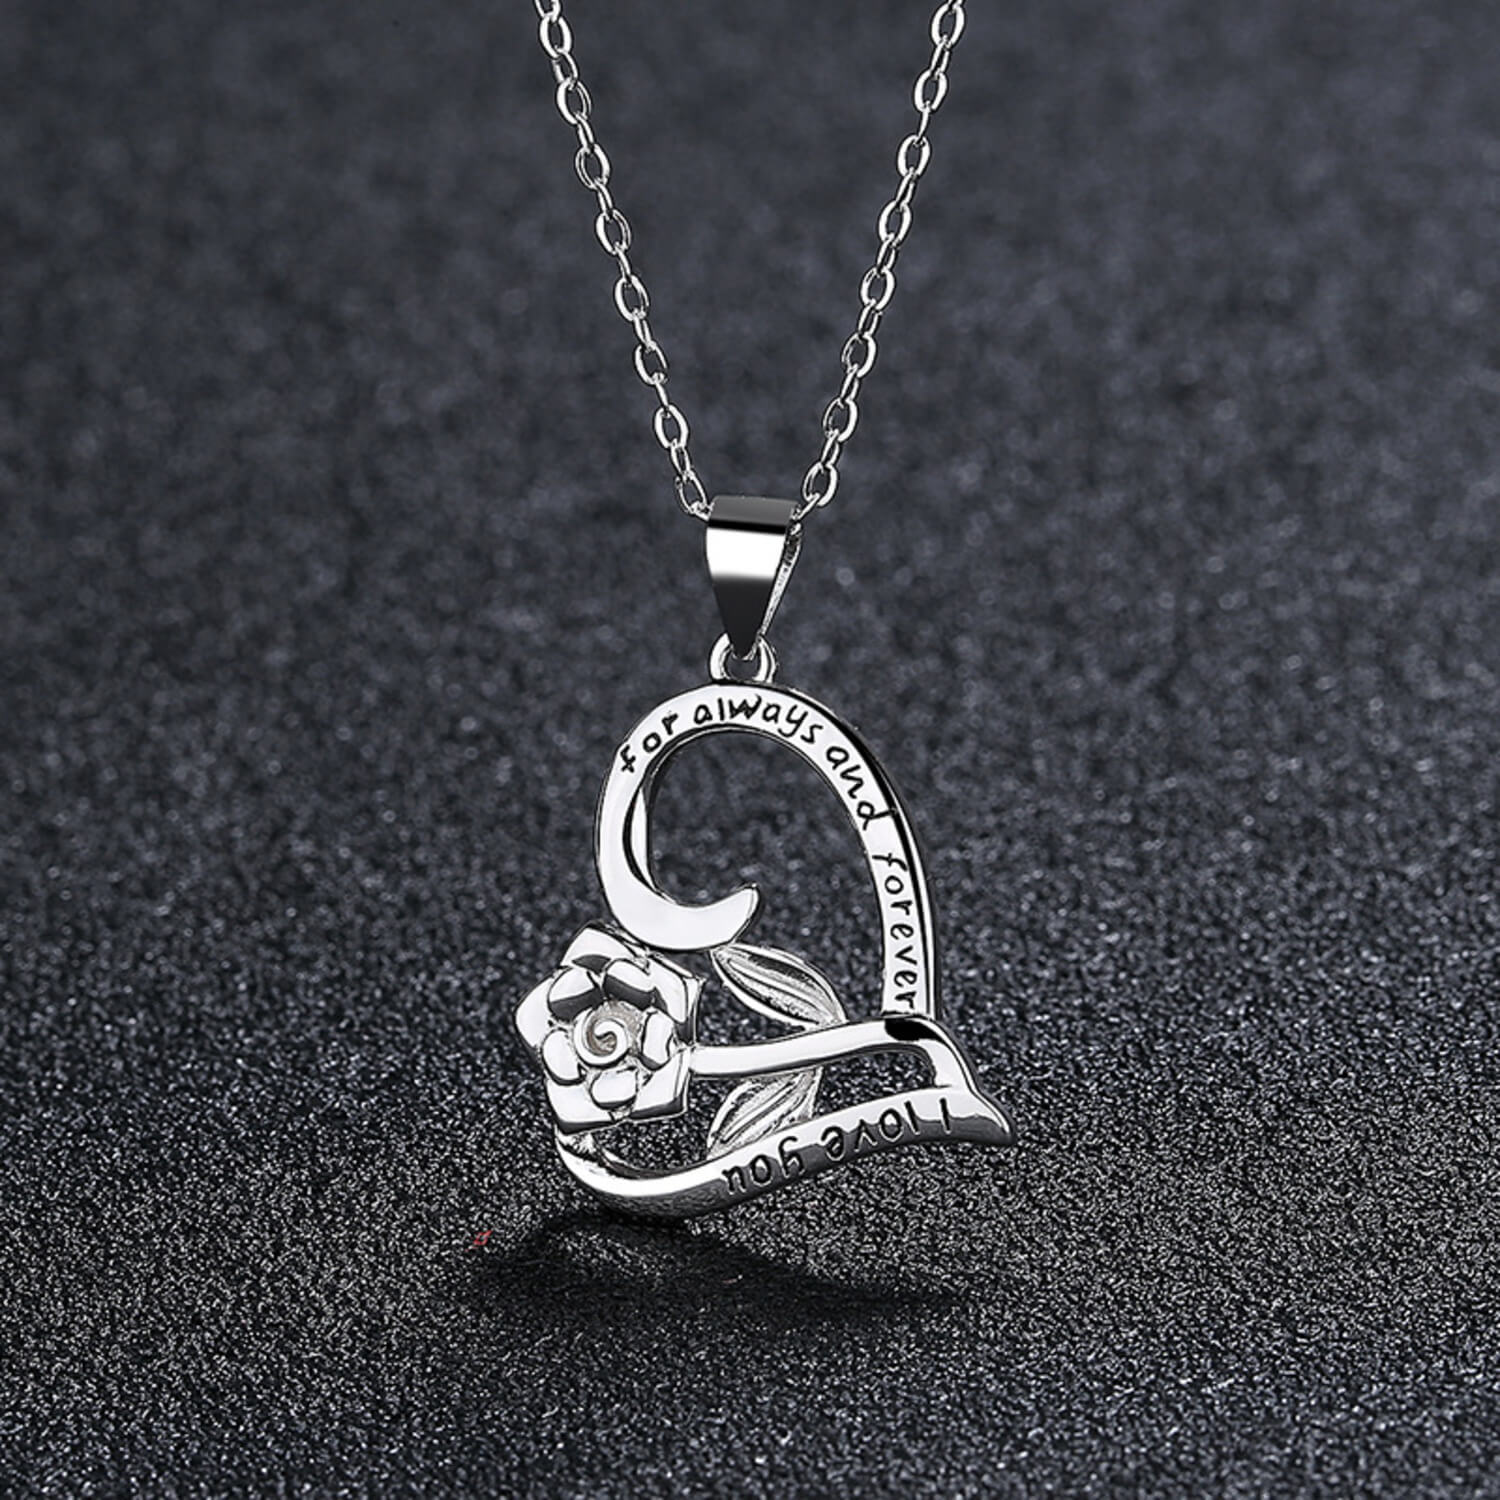 I love you always and forever necklace usa